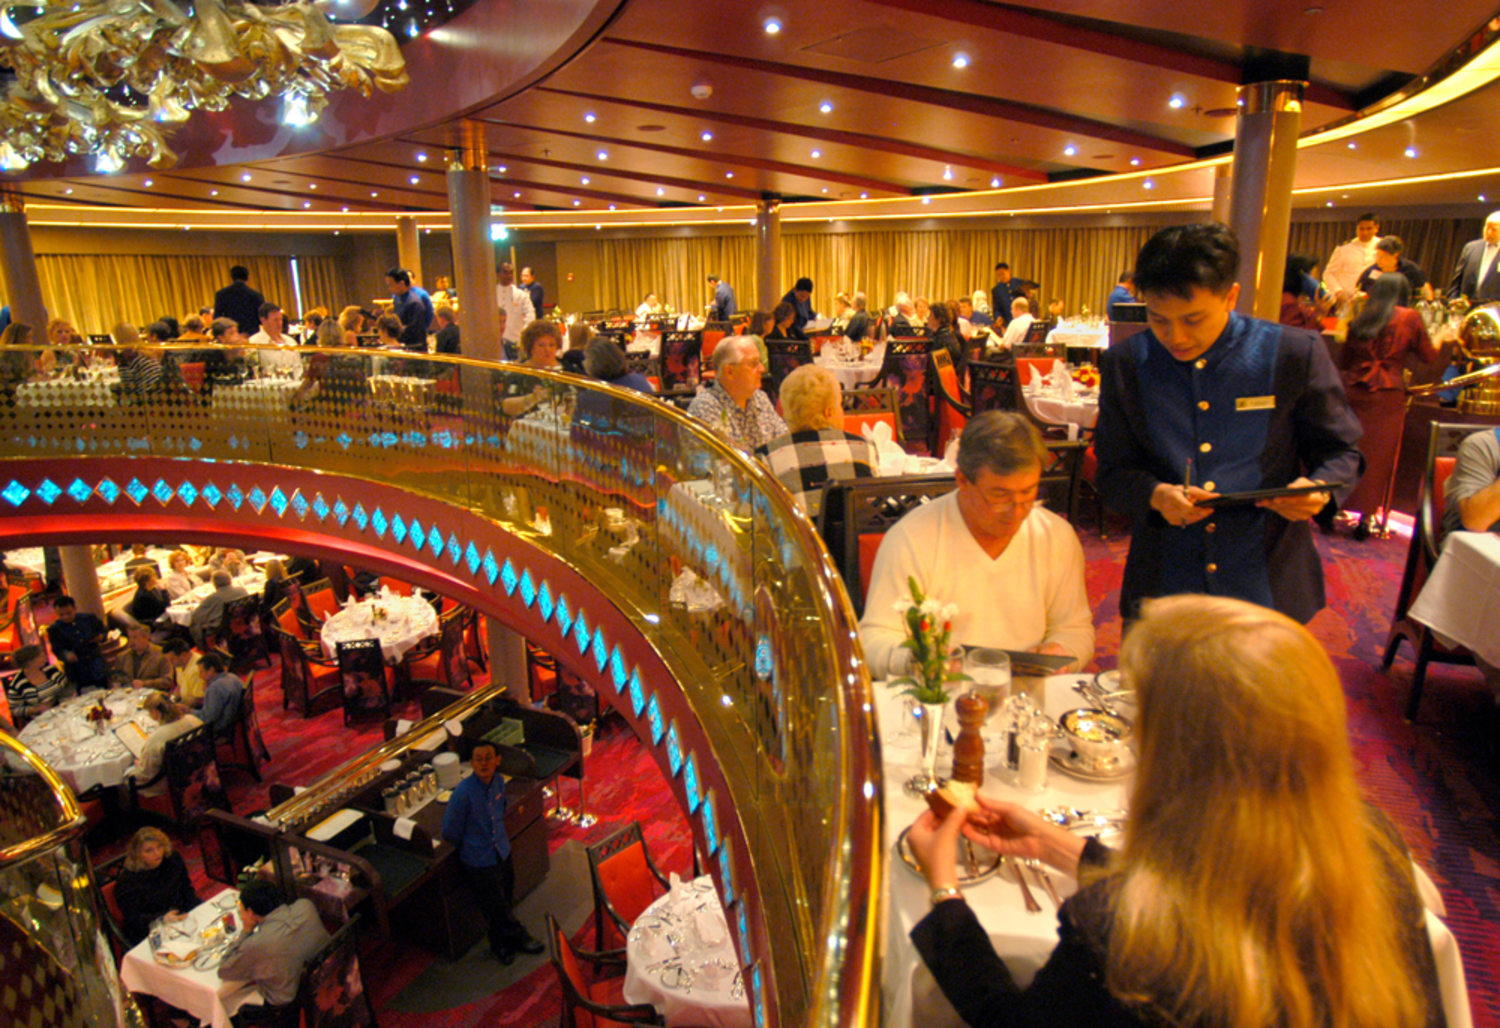 Dining rules relaxed on 'Freestyle' cruises